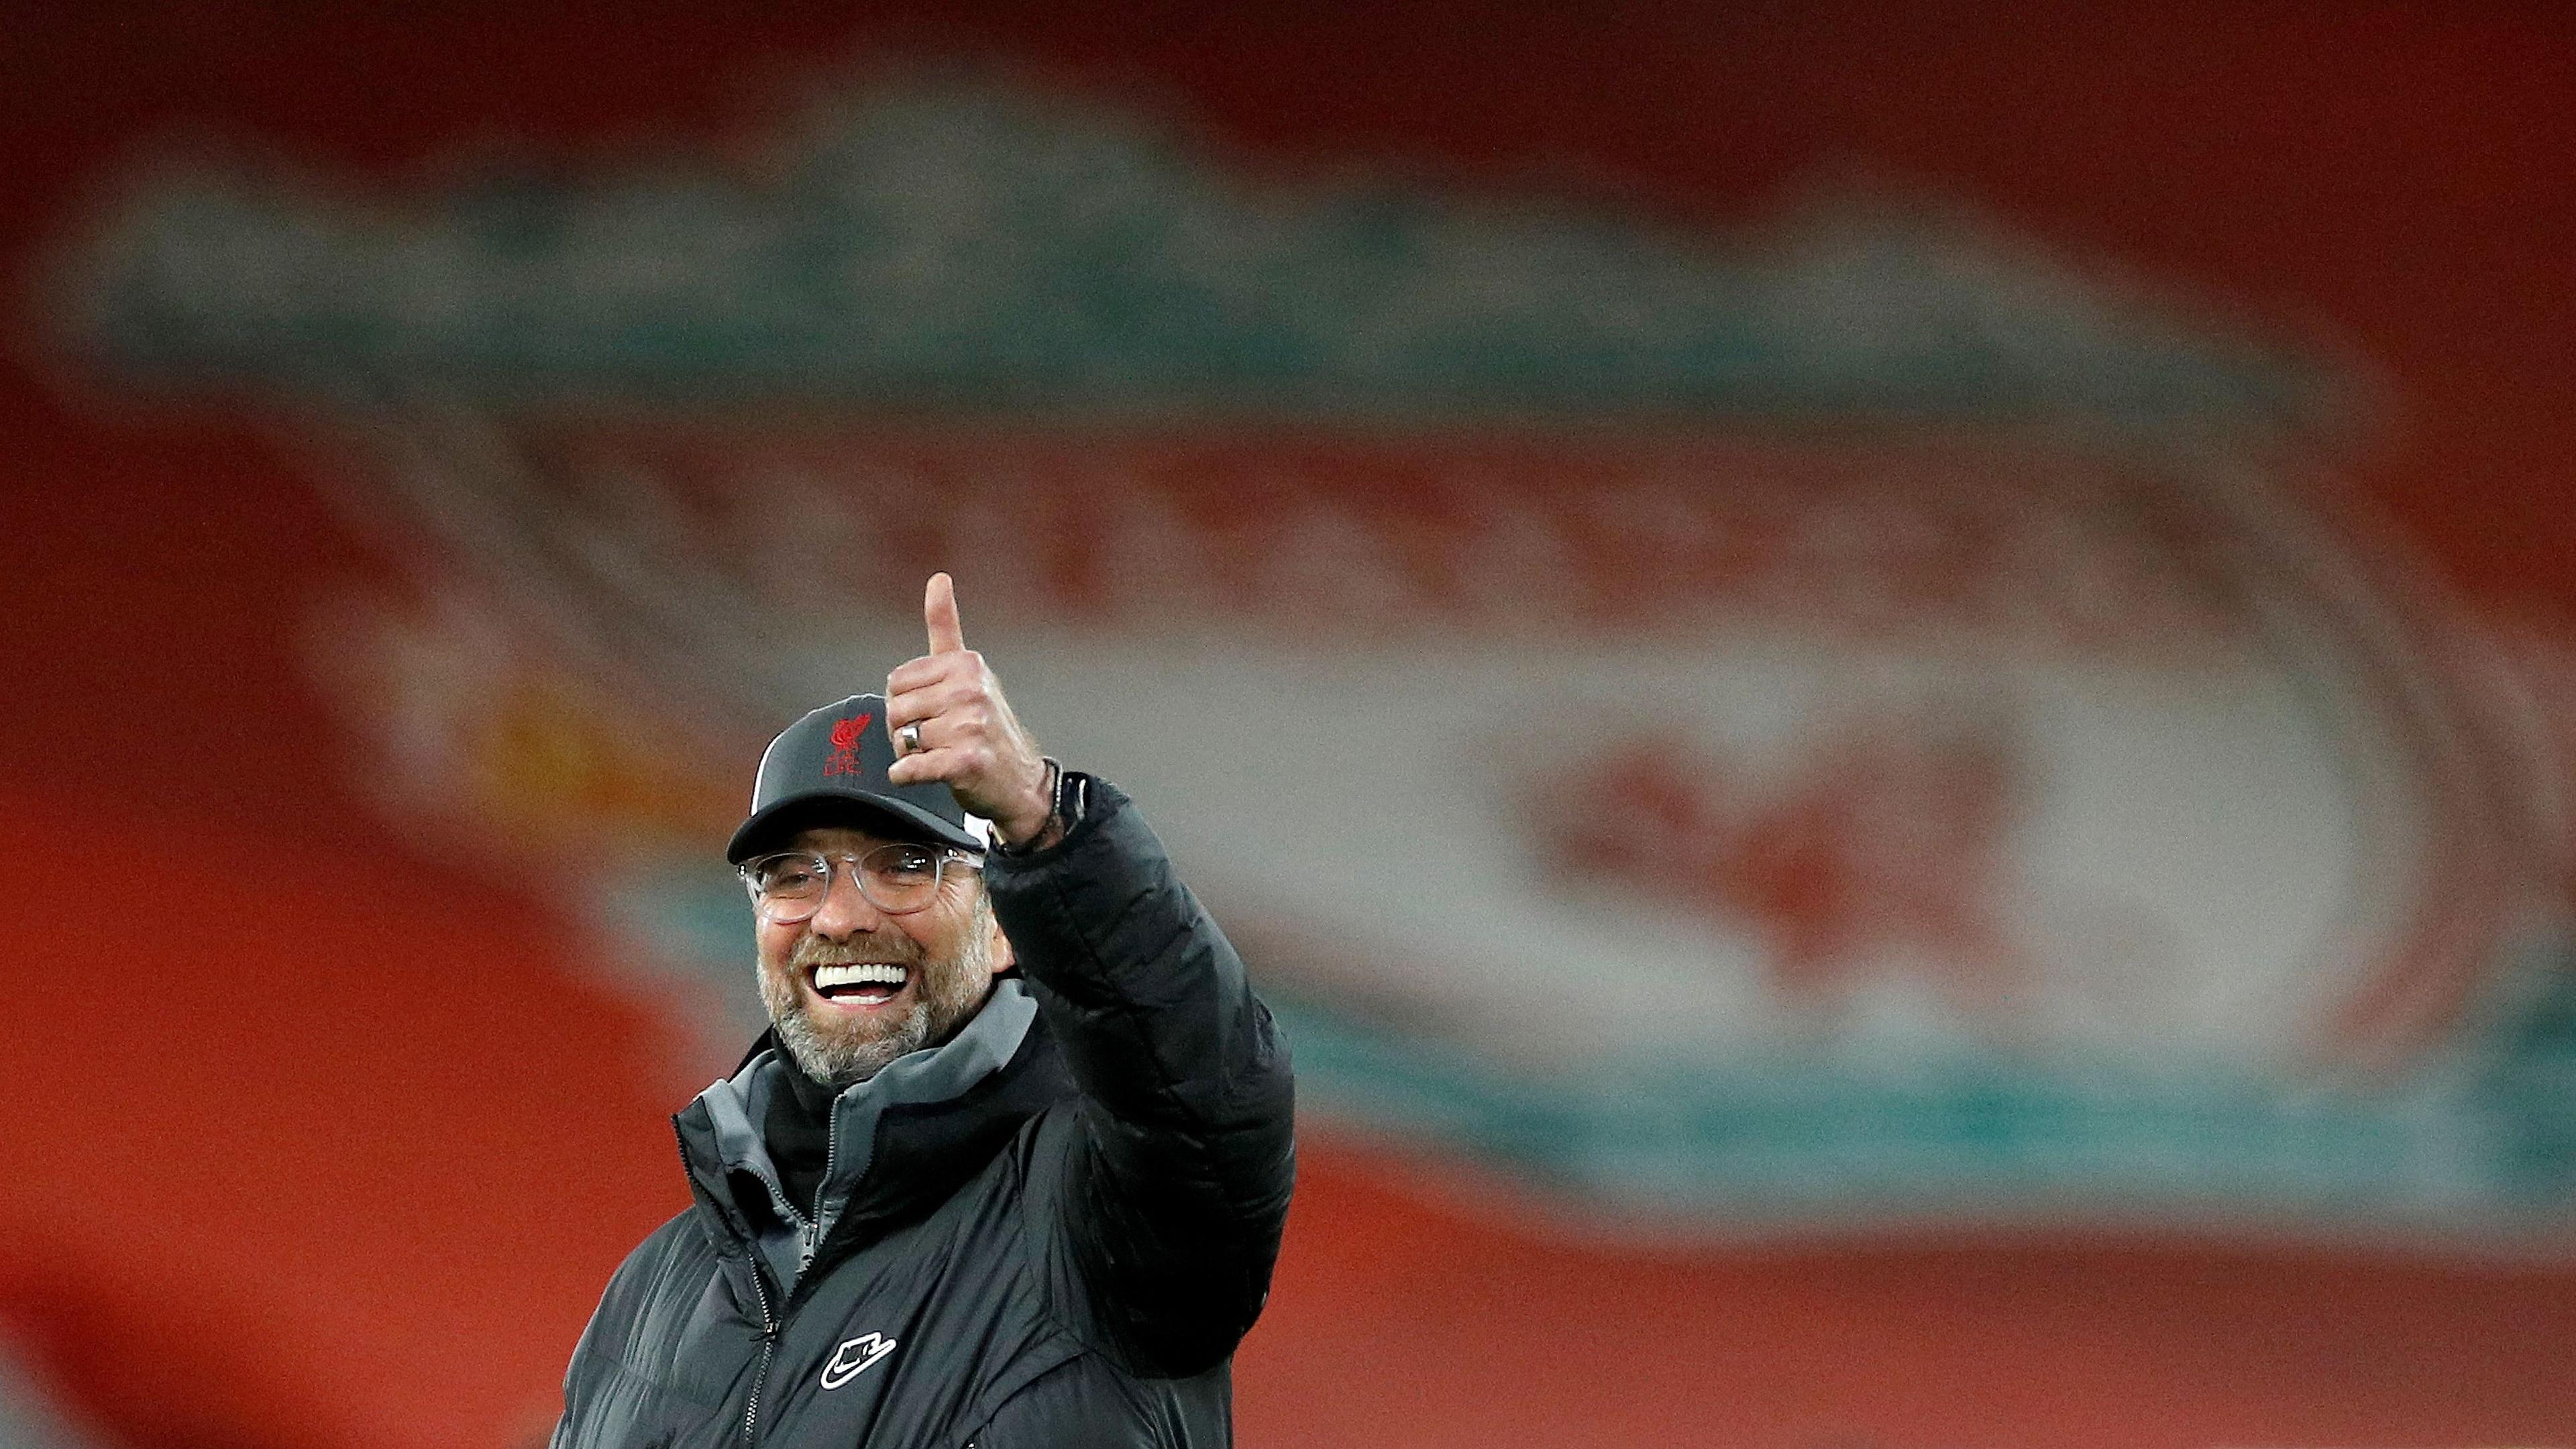 (FILES) Liverpool's German manager Jurgen Klopp reacts as his players warm up for the English Premier League football match between Liverpool and Brighton and Hove Albion at Anfield in Liverpool, north west England on February 3, 2021. Jurgen Klopp will manage his last match, at Anfield on May 19, 2024 after announcing in January of the same year, that he would be stepping down at the end of the season. The German coach became the only Liverpool manager to complete the collection of Premier League, Champions League, FA Cup, League Cup, Club World Cup and Community Shield during his nine year tenure. (Photo by PHIL NOBLE / AFP)